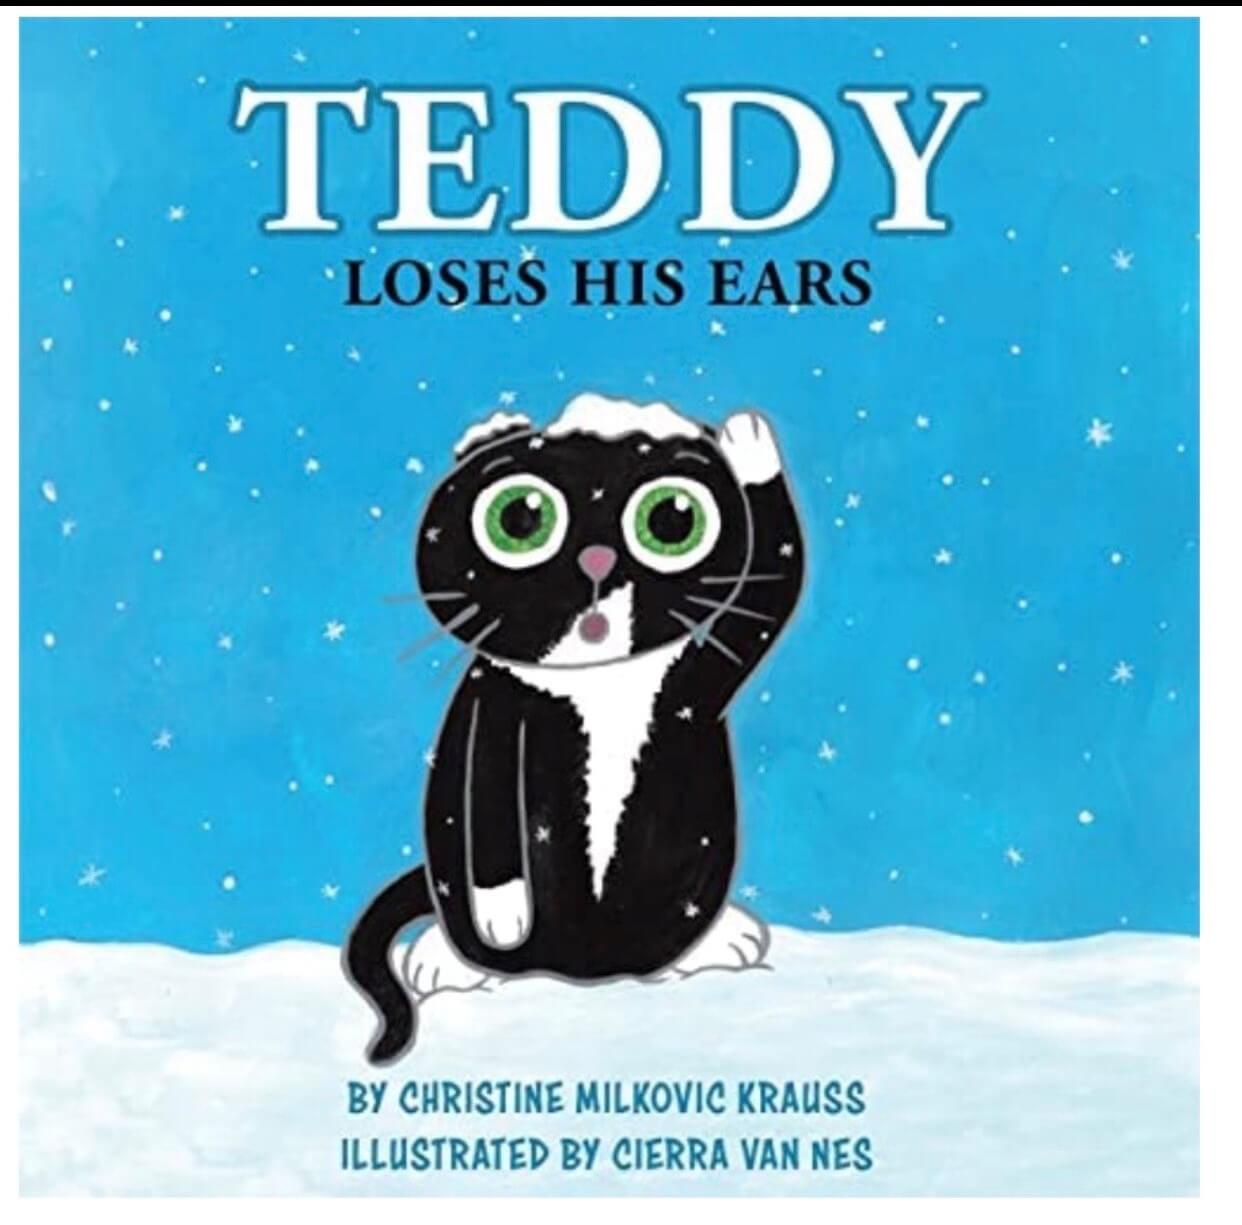 Teddy Loses His Ears book cover